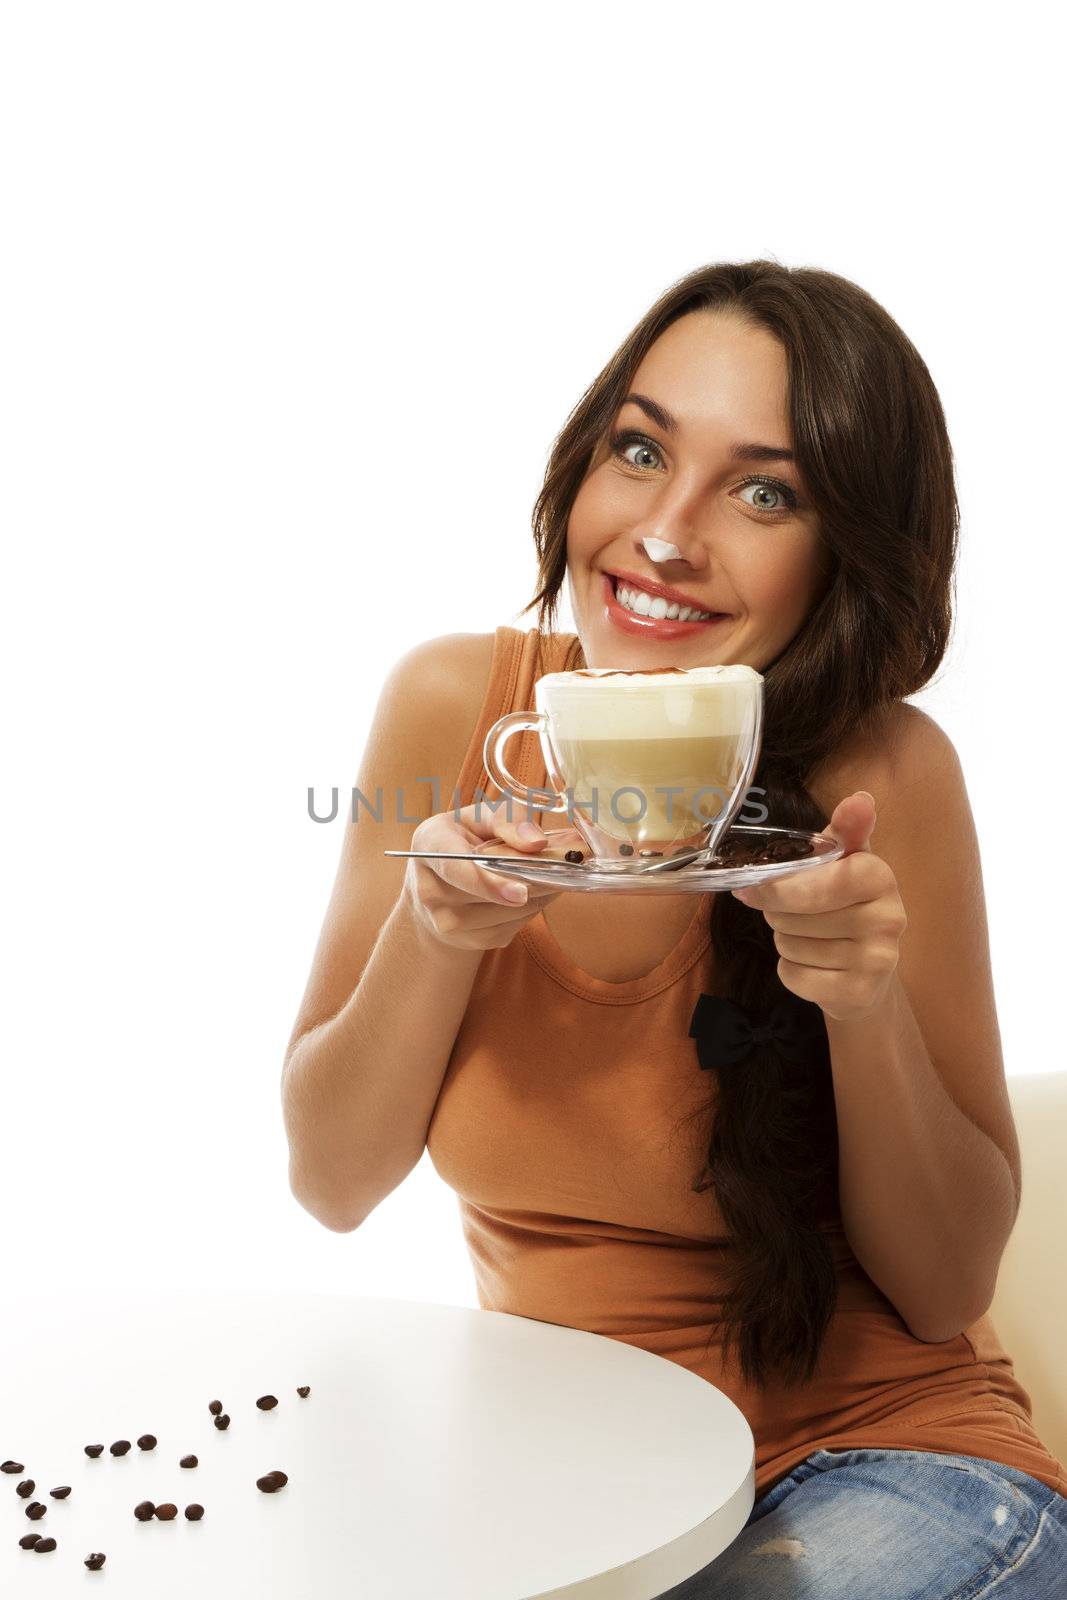 young woman with cappuccino coffee has milk foam on her nose by RobStark